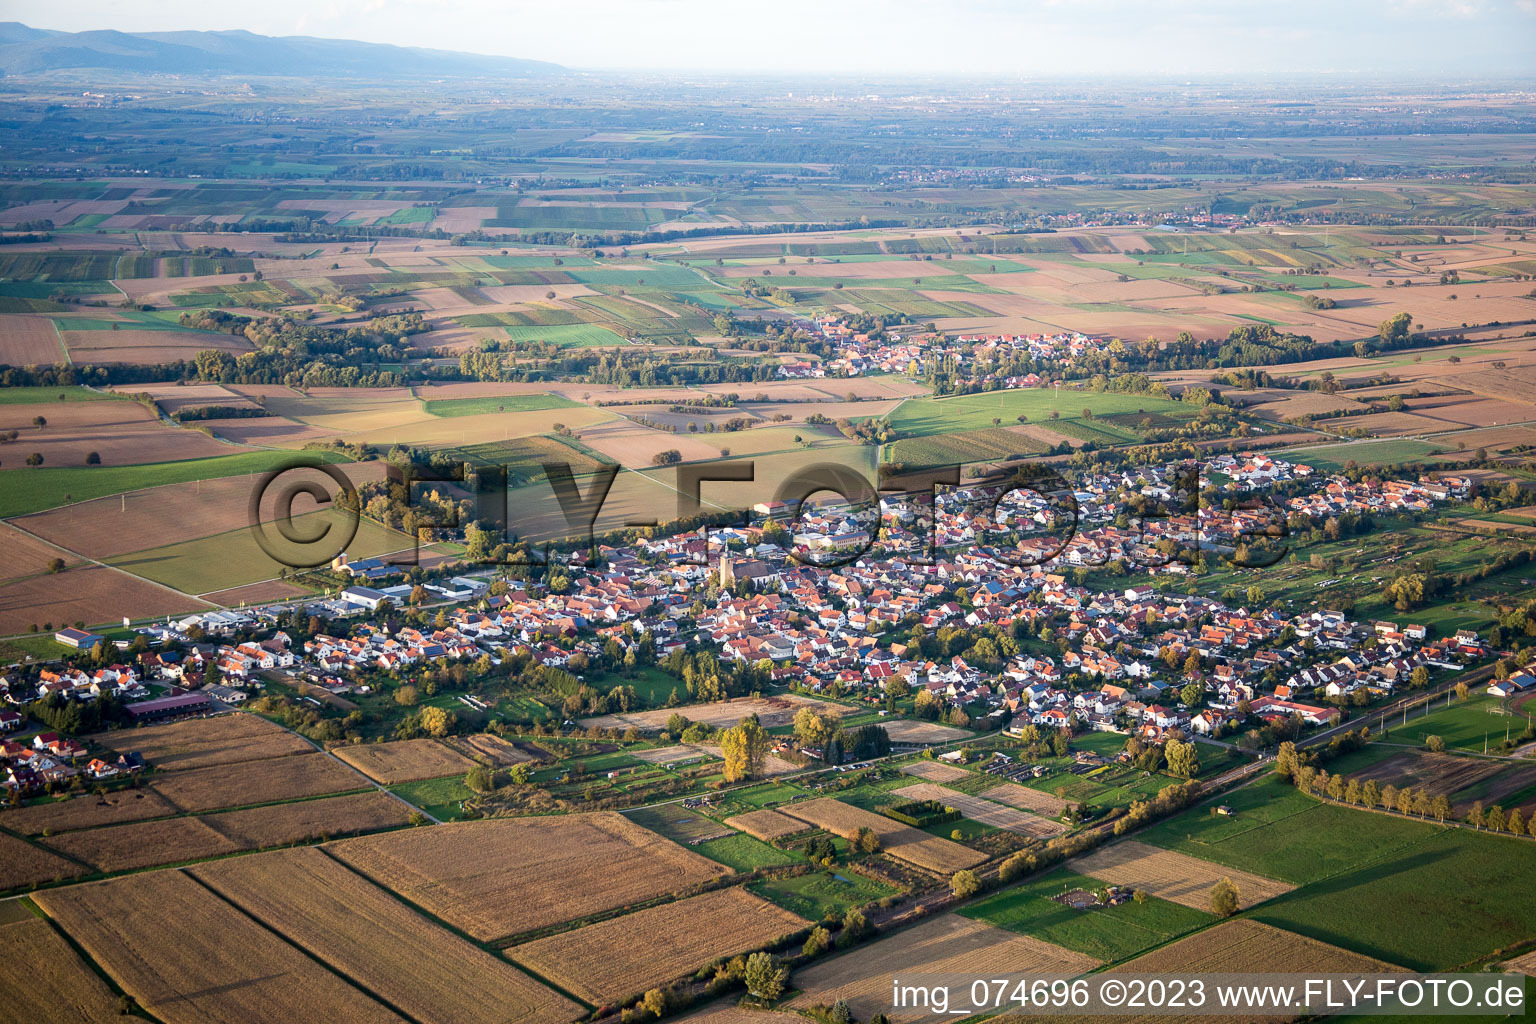 Kapsweyer in the state Rhineland-Palatinate, Germany seen from above